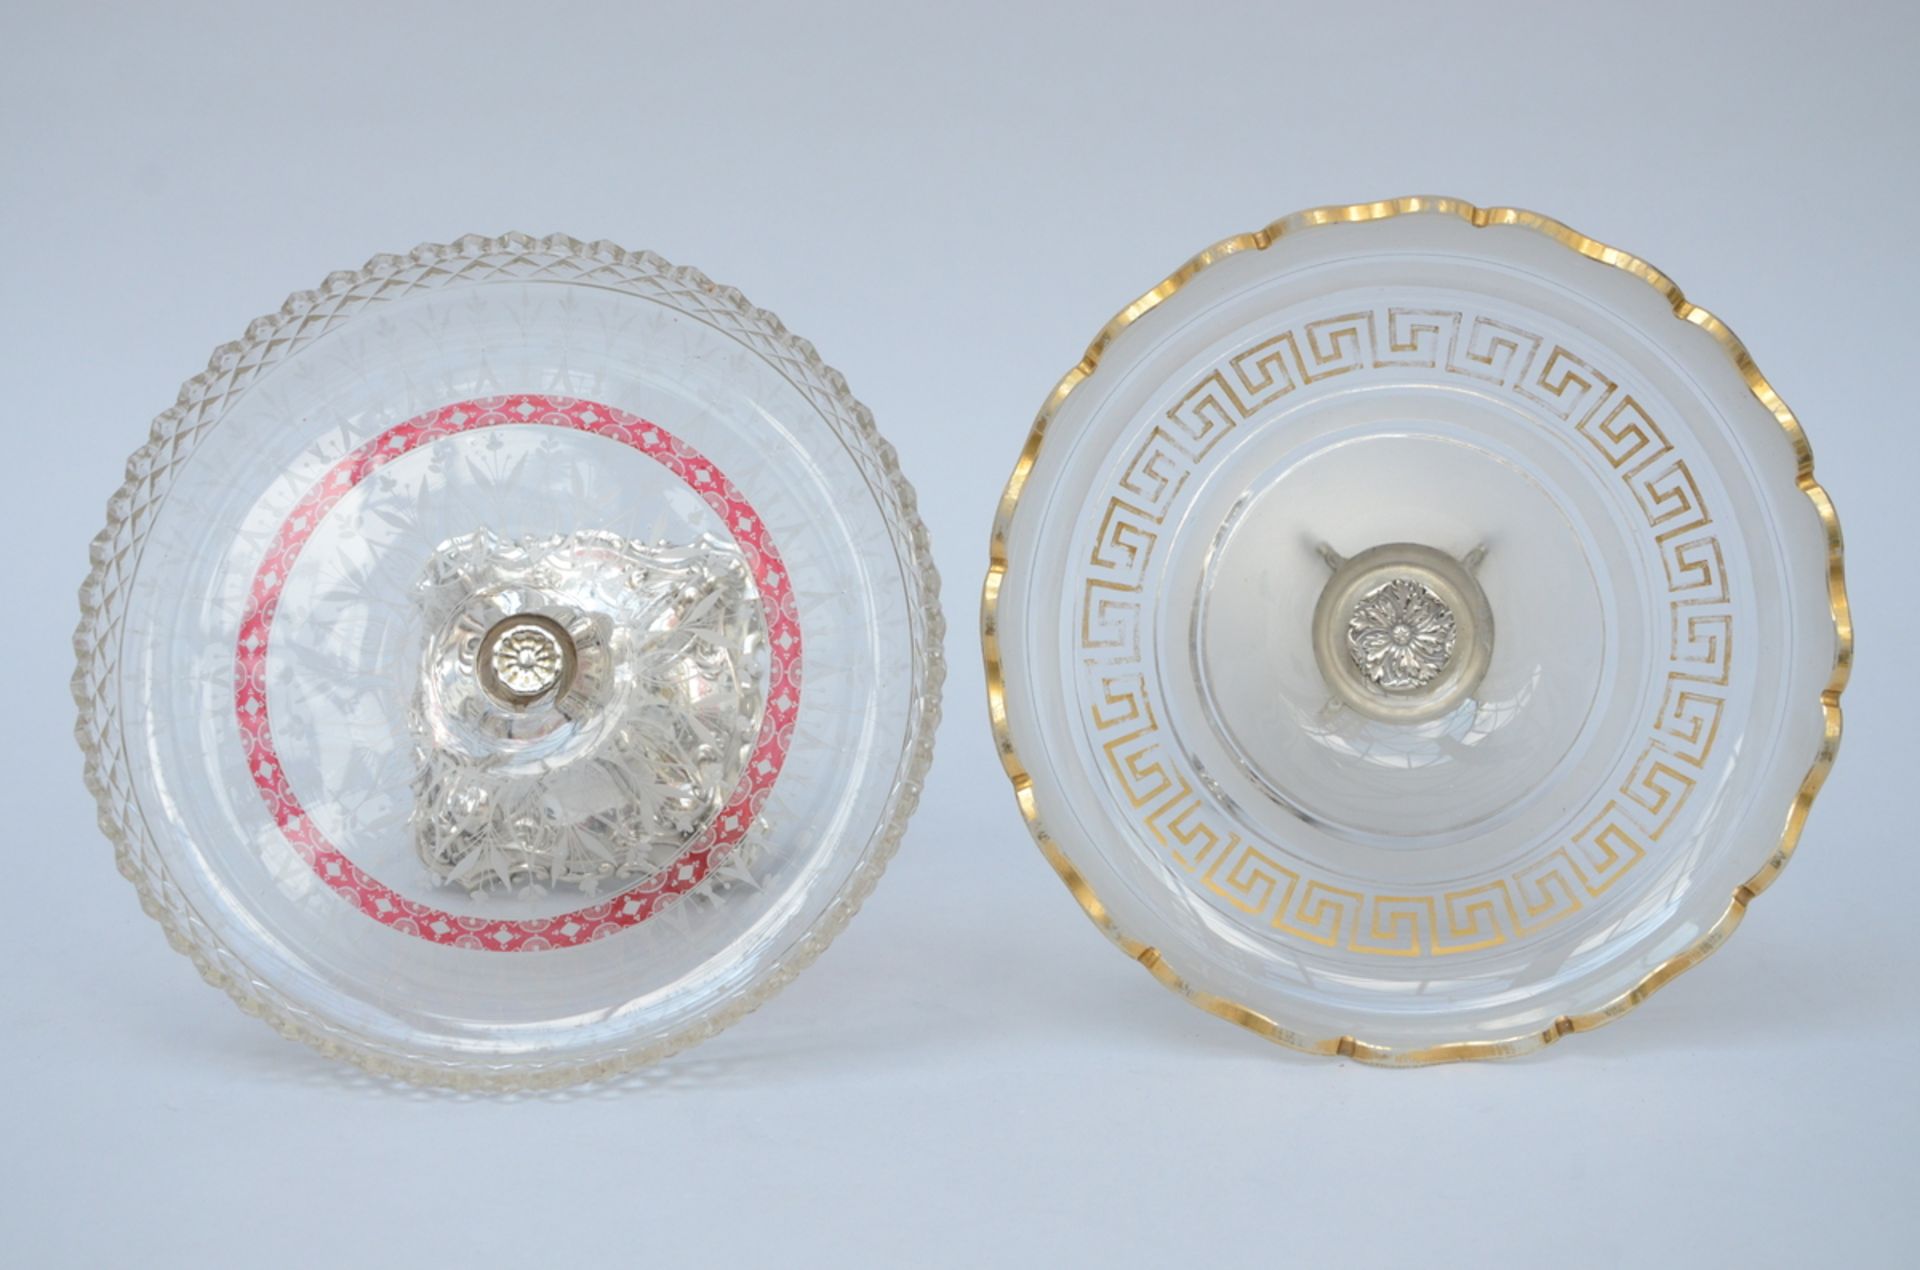 Two round crystal presenters on a silver base (15x26cm) (22x26cm) - Image 2 of 4